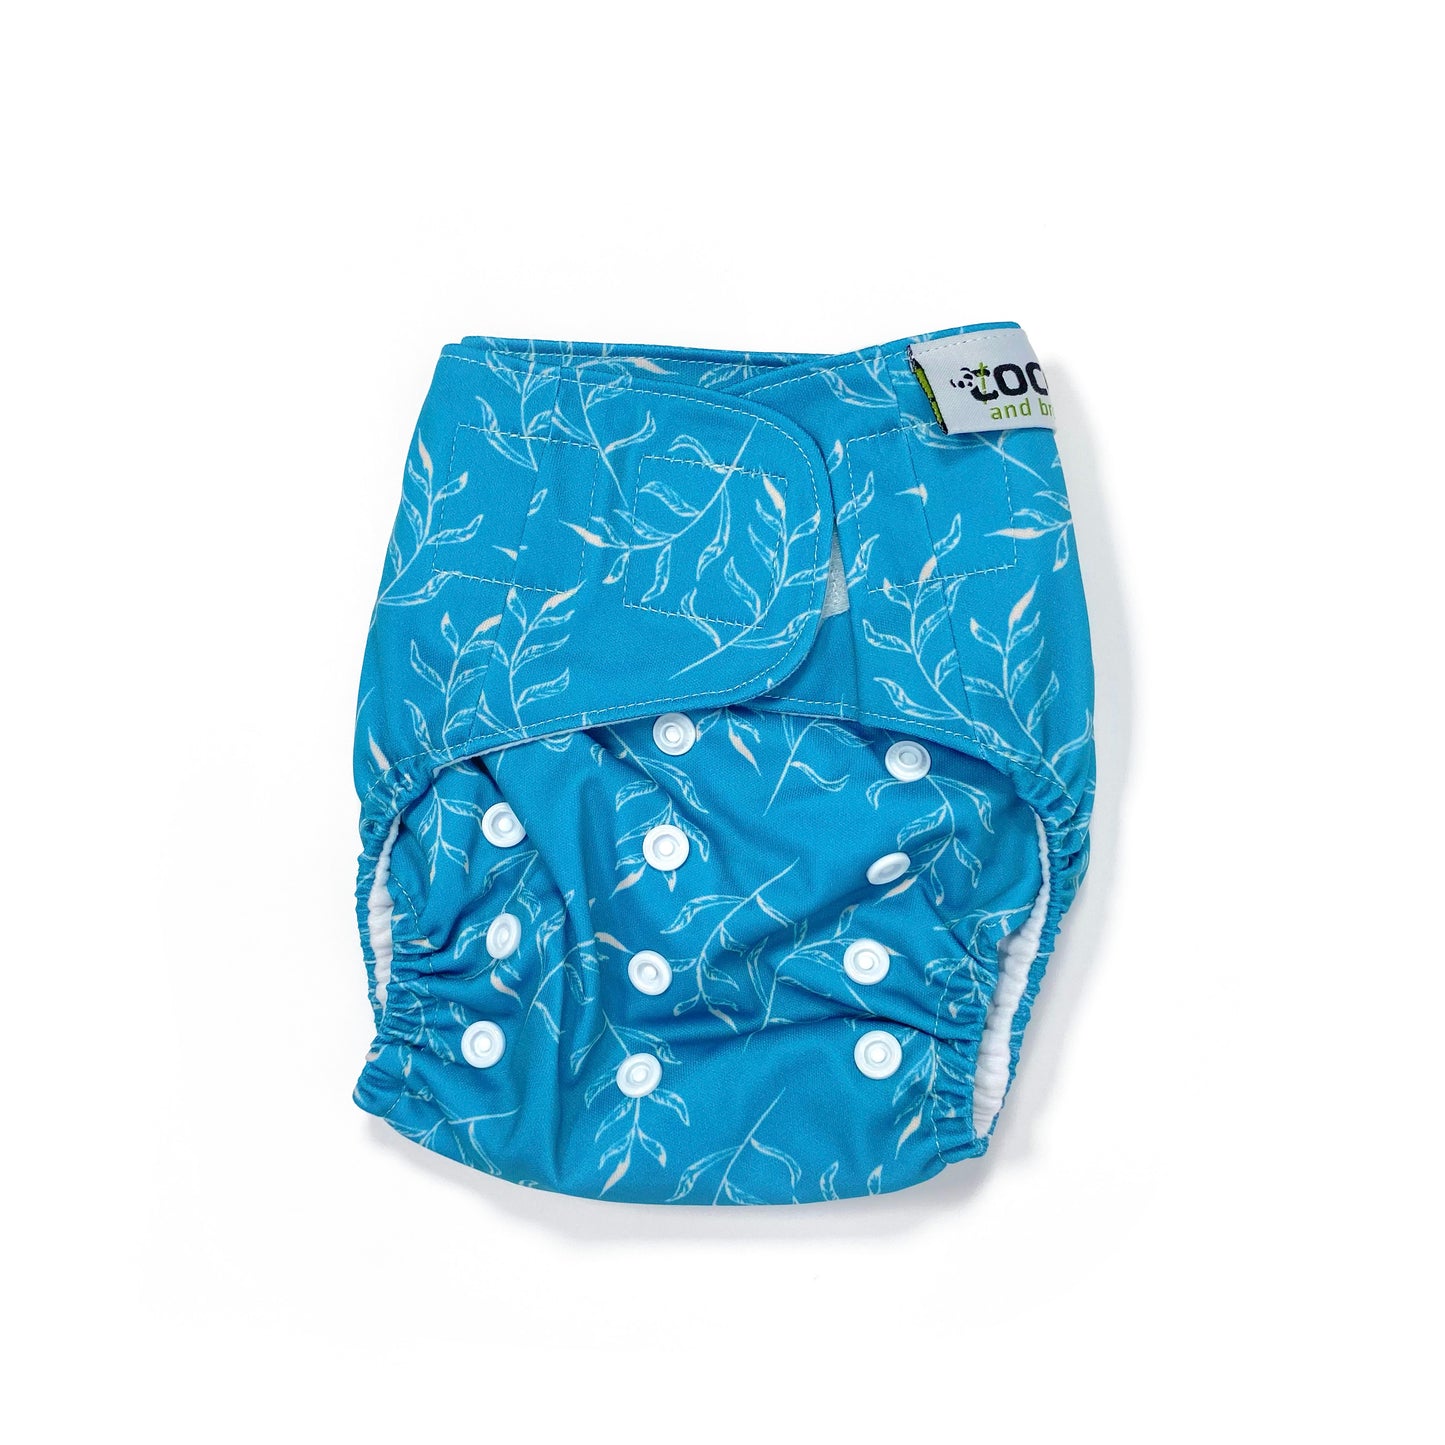 An adjustable reusable nappy for babies and toddlers, featuring a blue fern design, with images of white fern leaves on a blue background. View shows the front of the nappy, with fastenings closed.